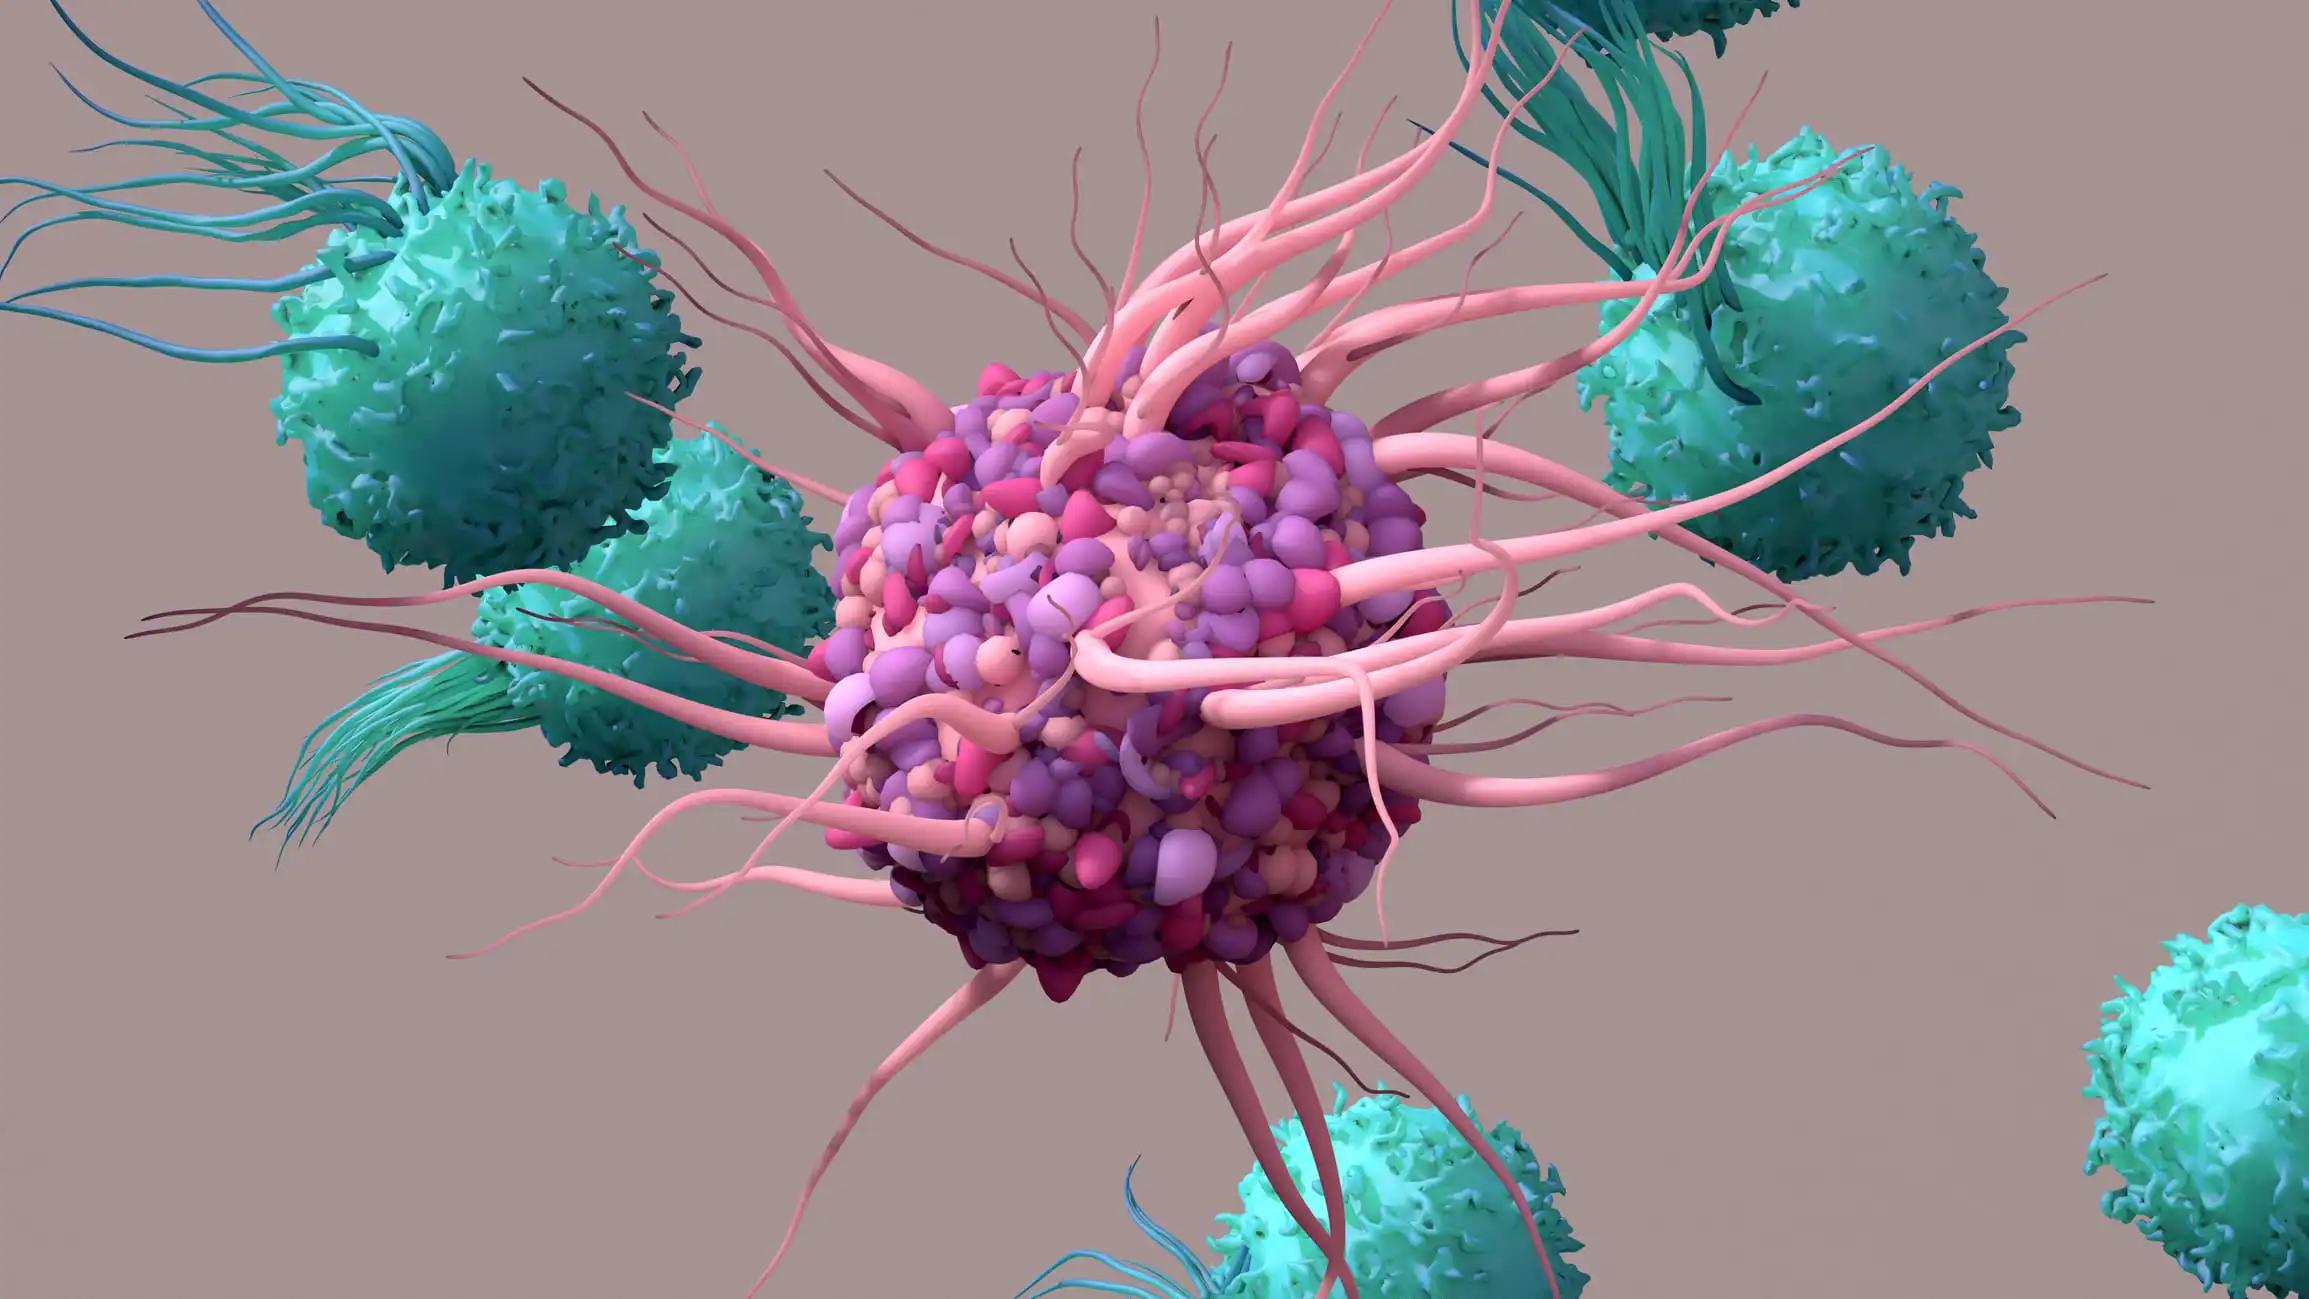 Immune Cells Therapy kills Myeloma Cancer Cells